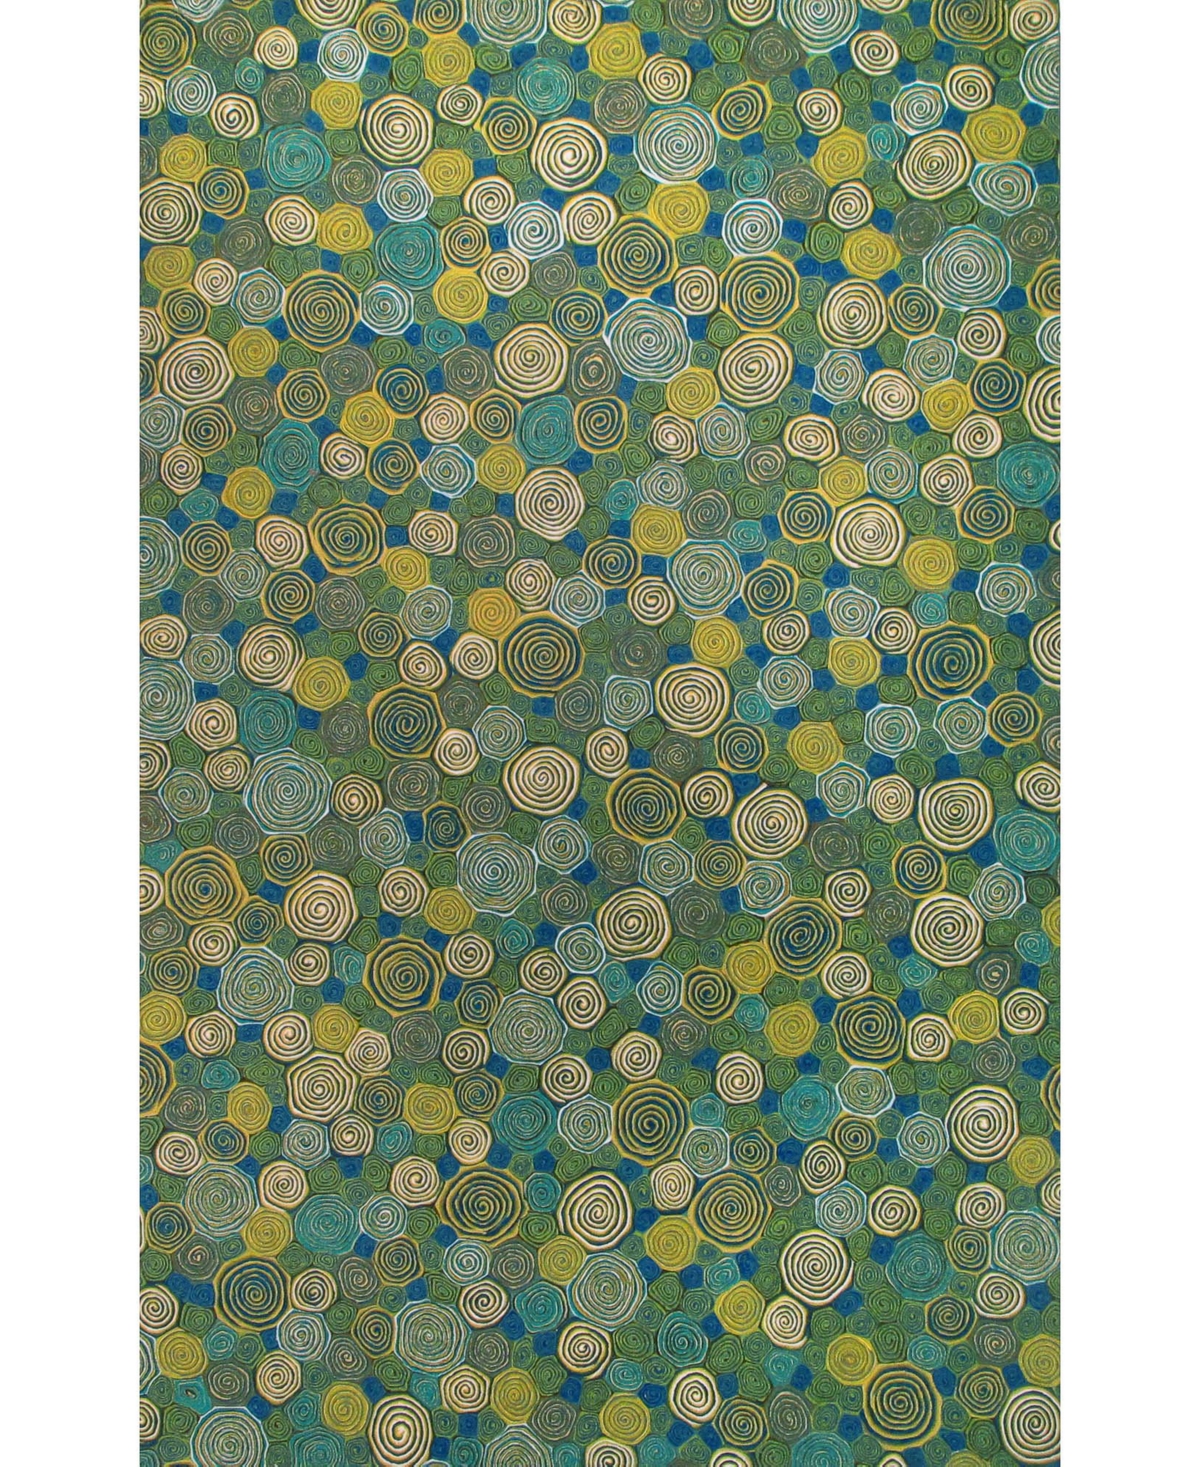 Liora Manne Visions Iii Giant Swirls 3'6" X 5'6" Outdoor Area Rug In Green,blue